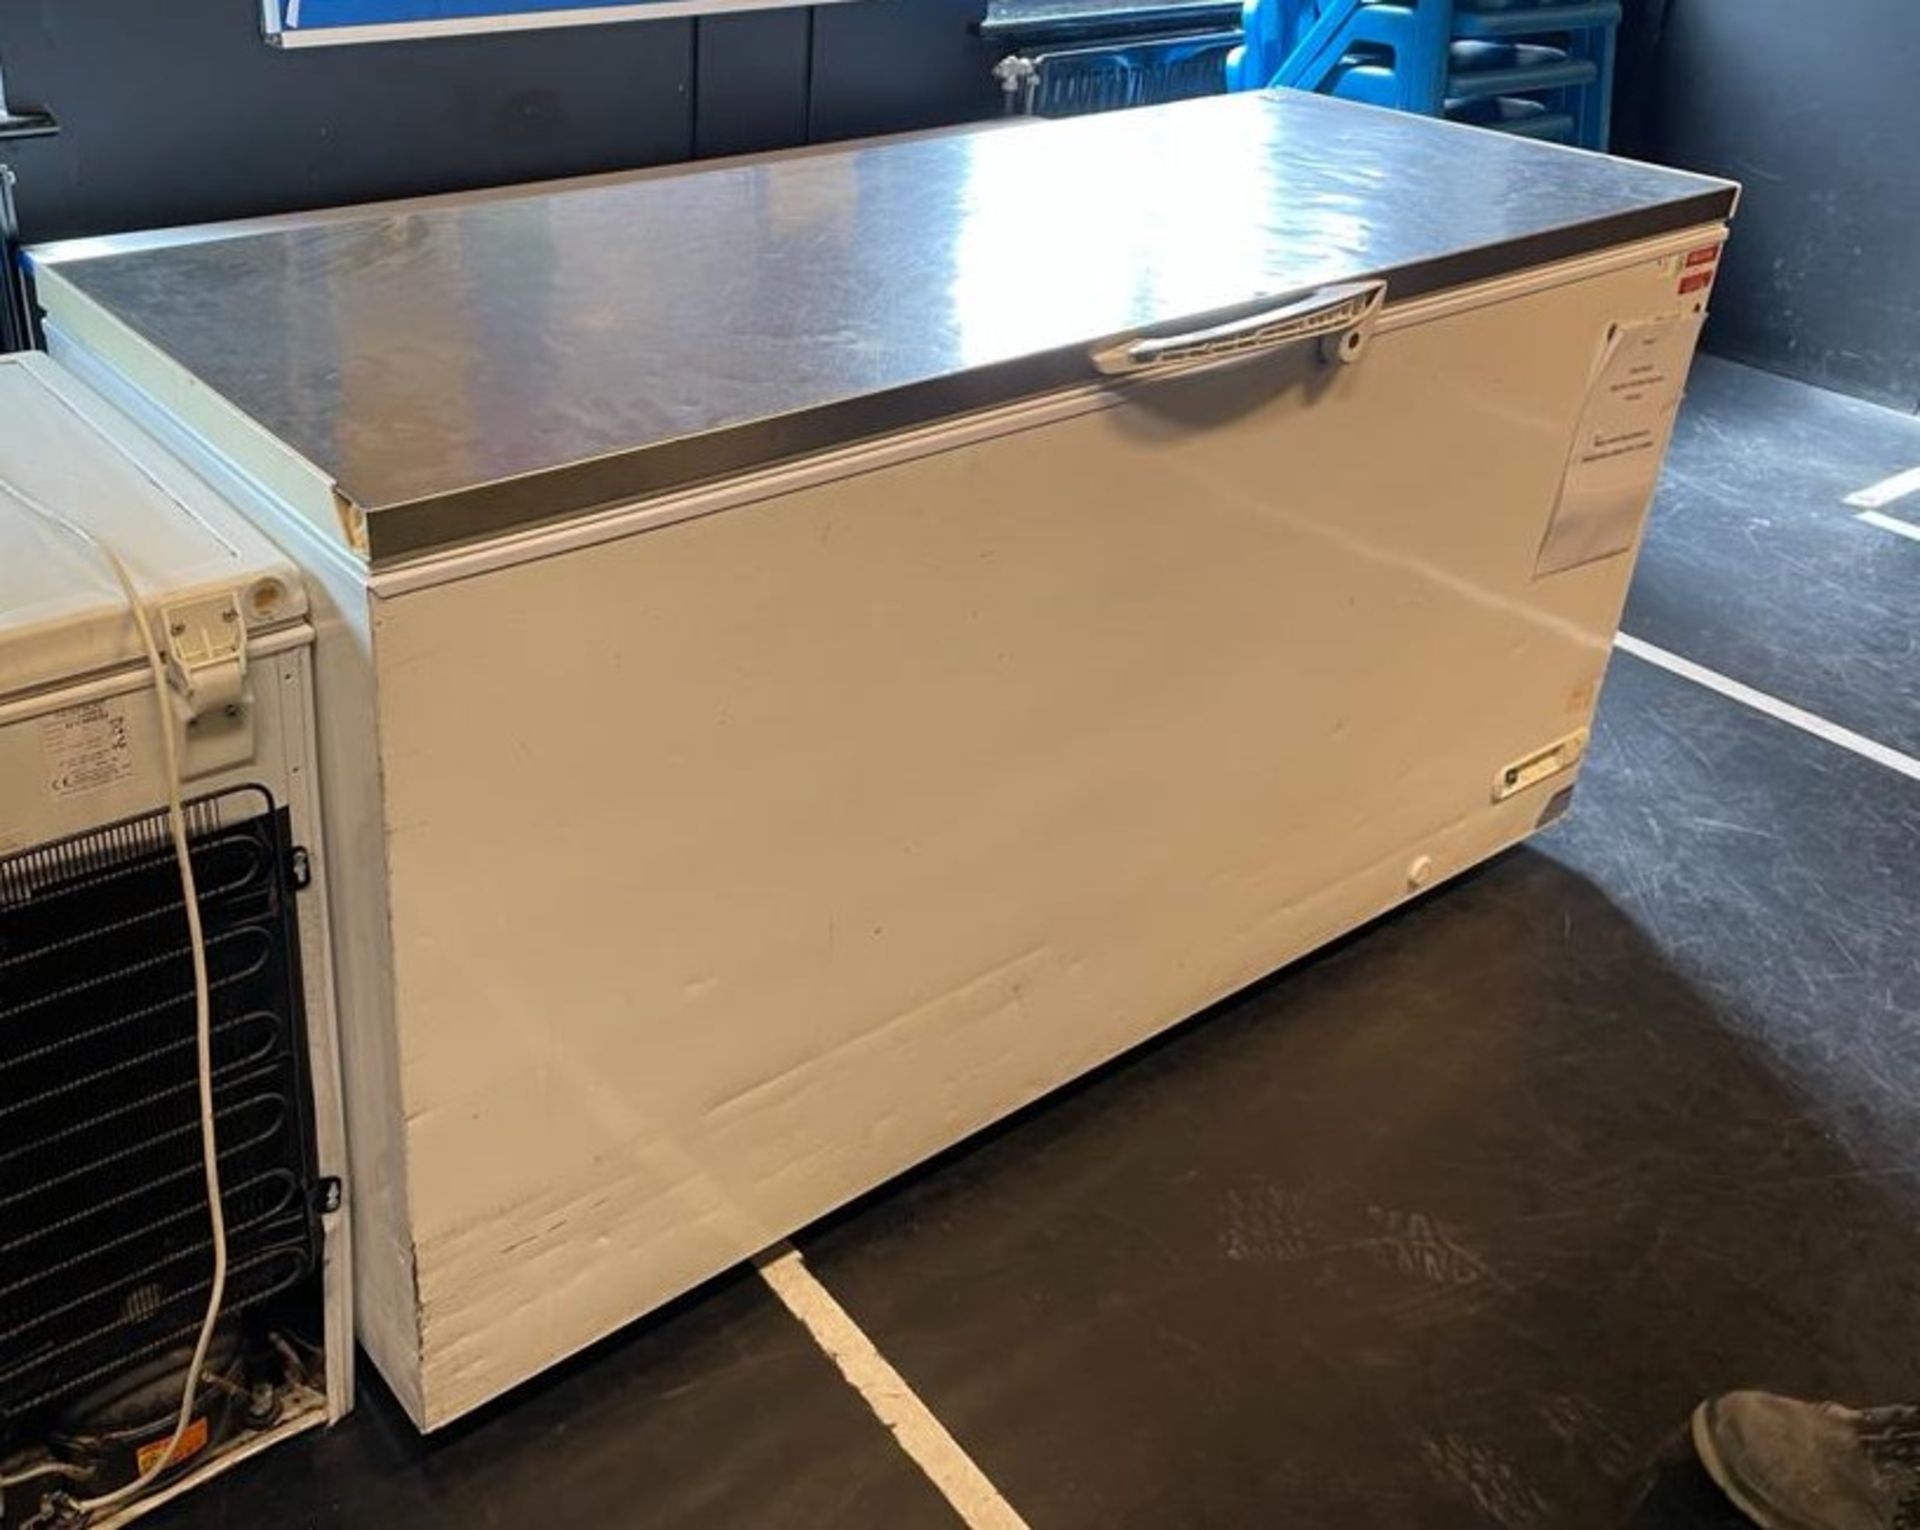 1 x Commercial Countertop 6ft Storage Freezer With Stainless Steel Lid - Recently Removed From